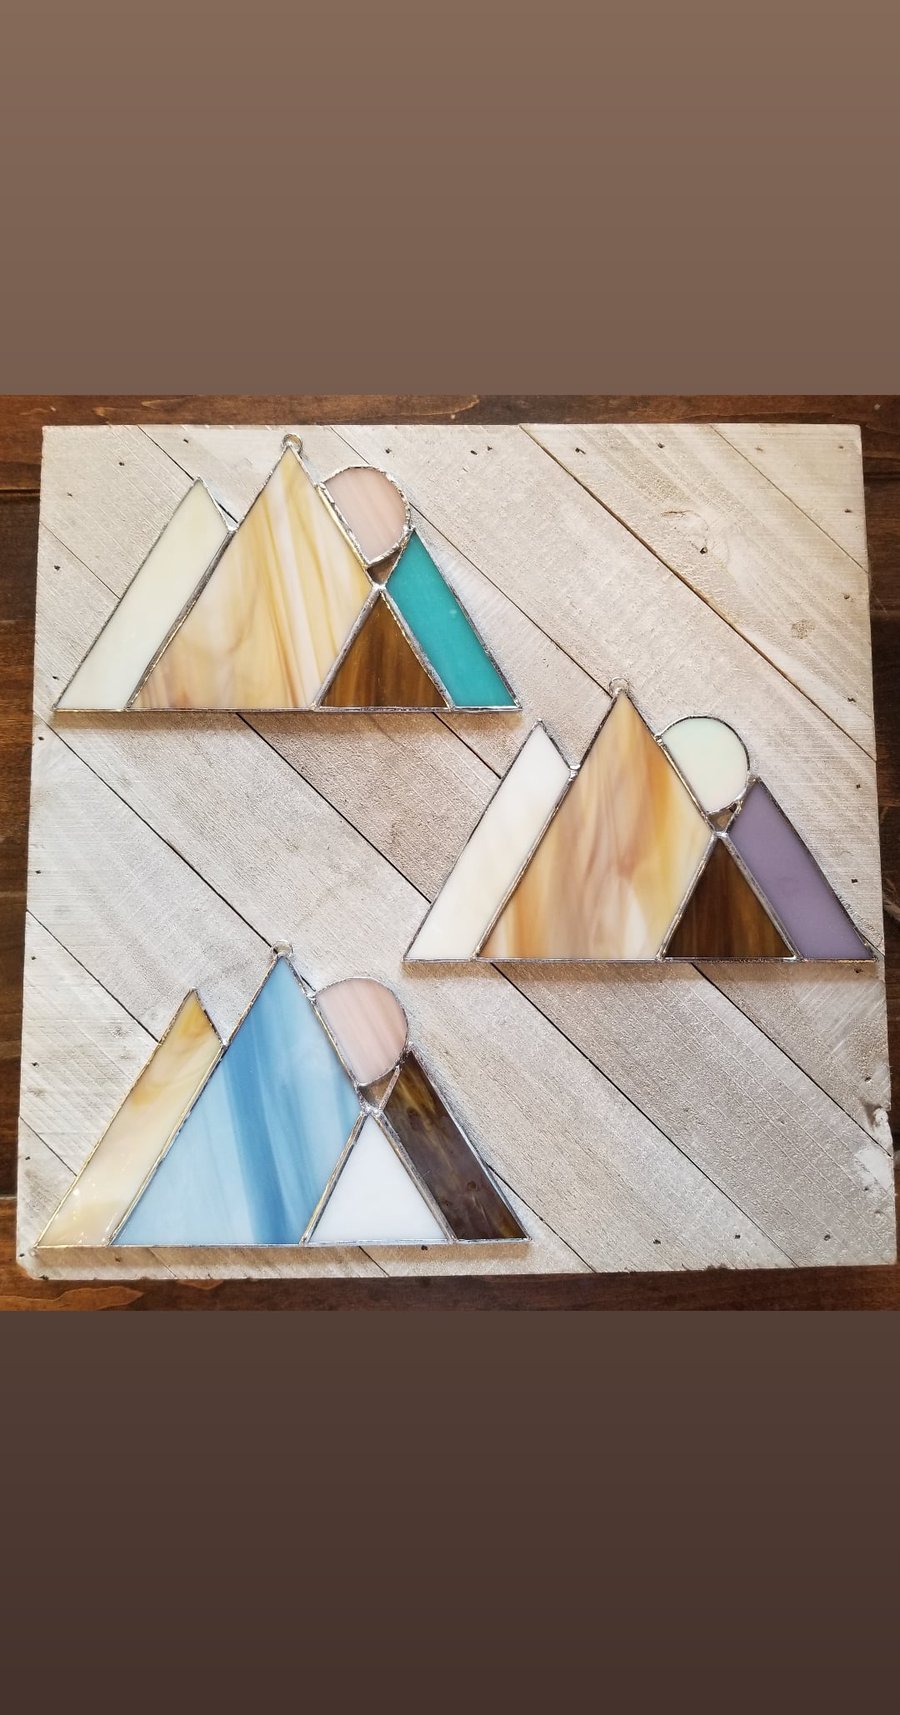 Image of Moon Mountain Range-stained glass